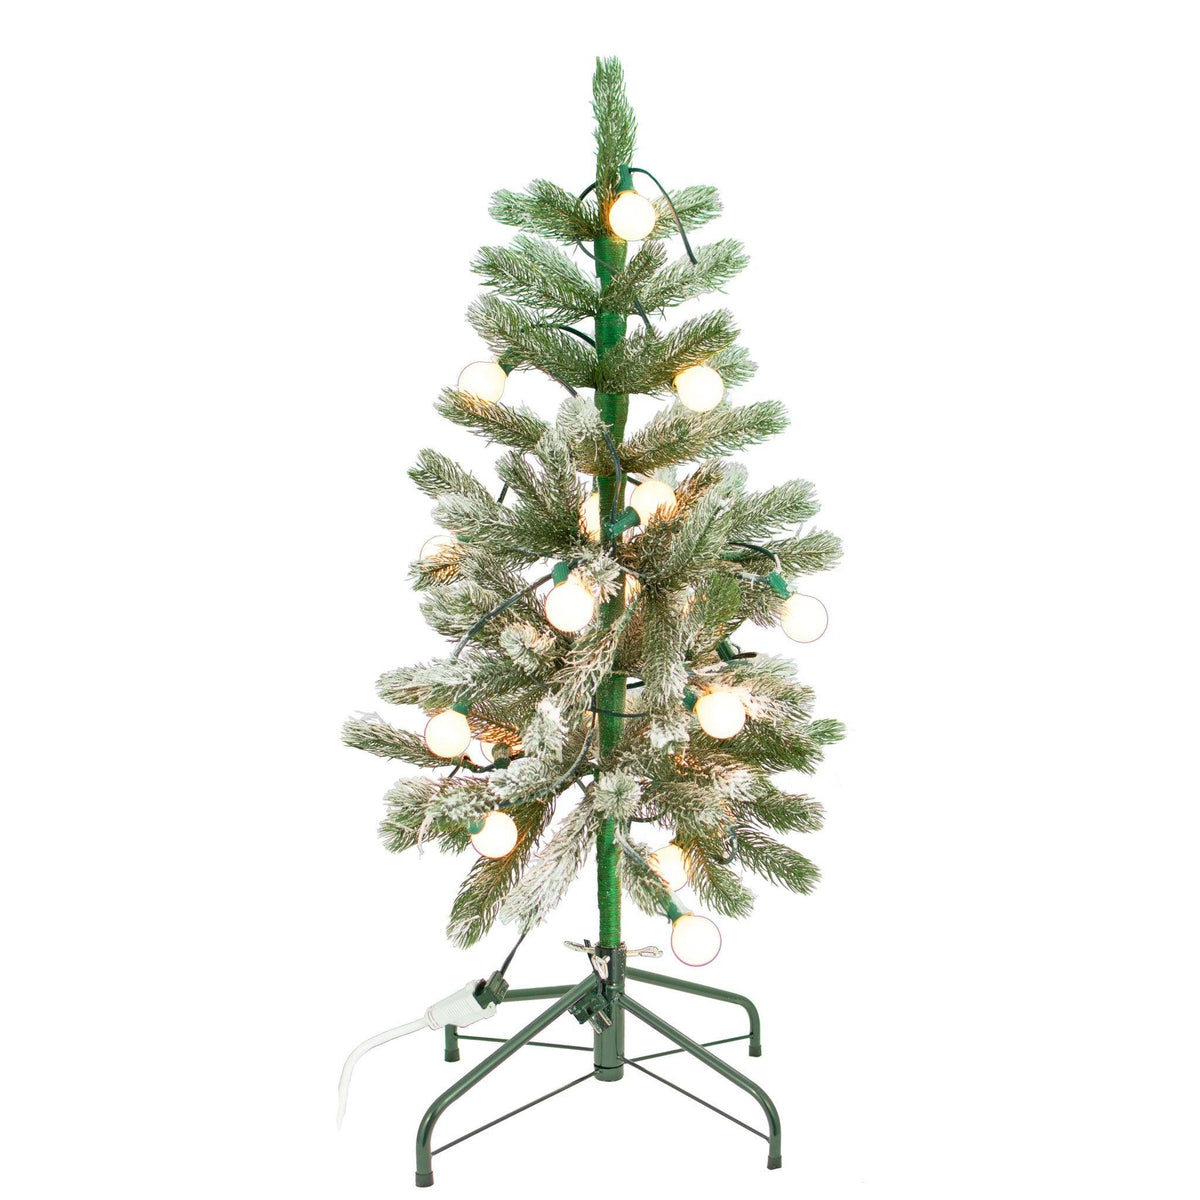 Lee Display's brand new Aspen Pine Christmas Trees are flocked with artificial white snow and lit with White G40 Lights.  Shop now at leedisplay.com